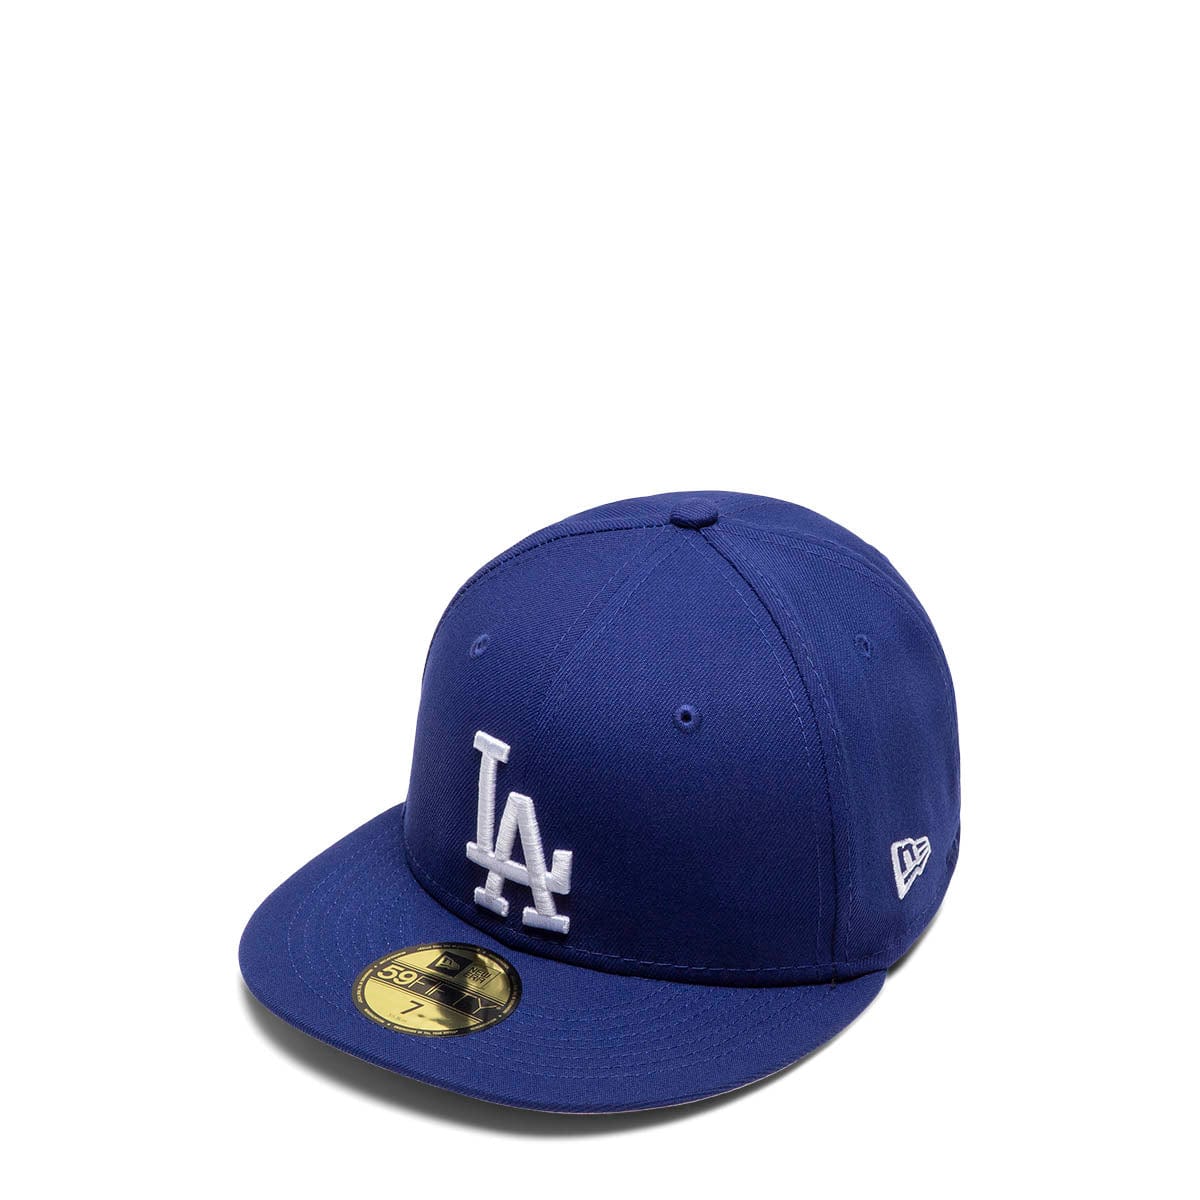 New Era 59-50 Royal Home Fitted Cap 8 1/4 / Royal